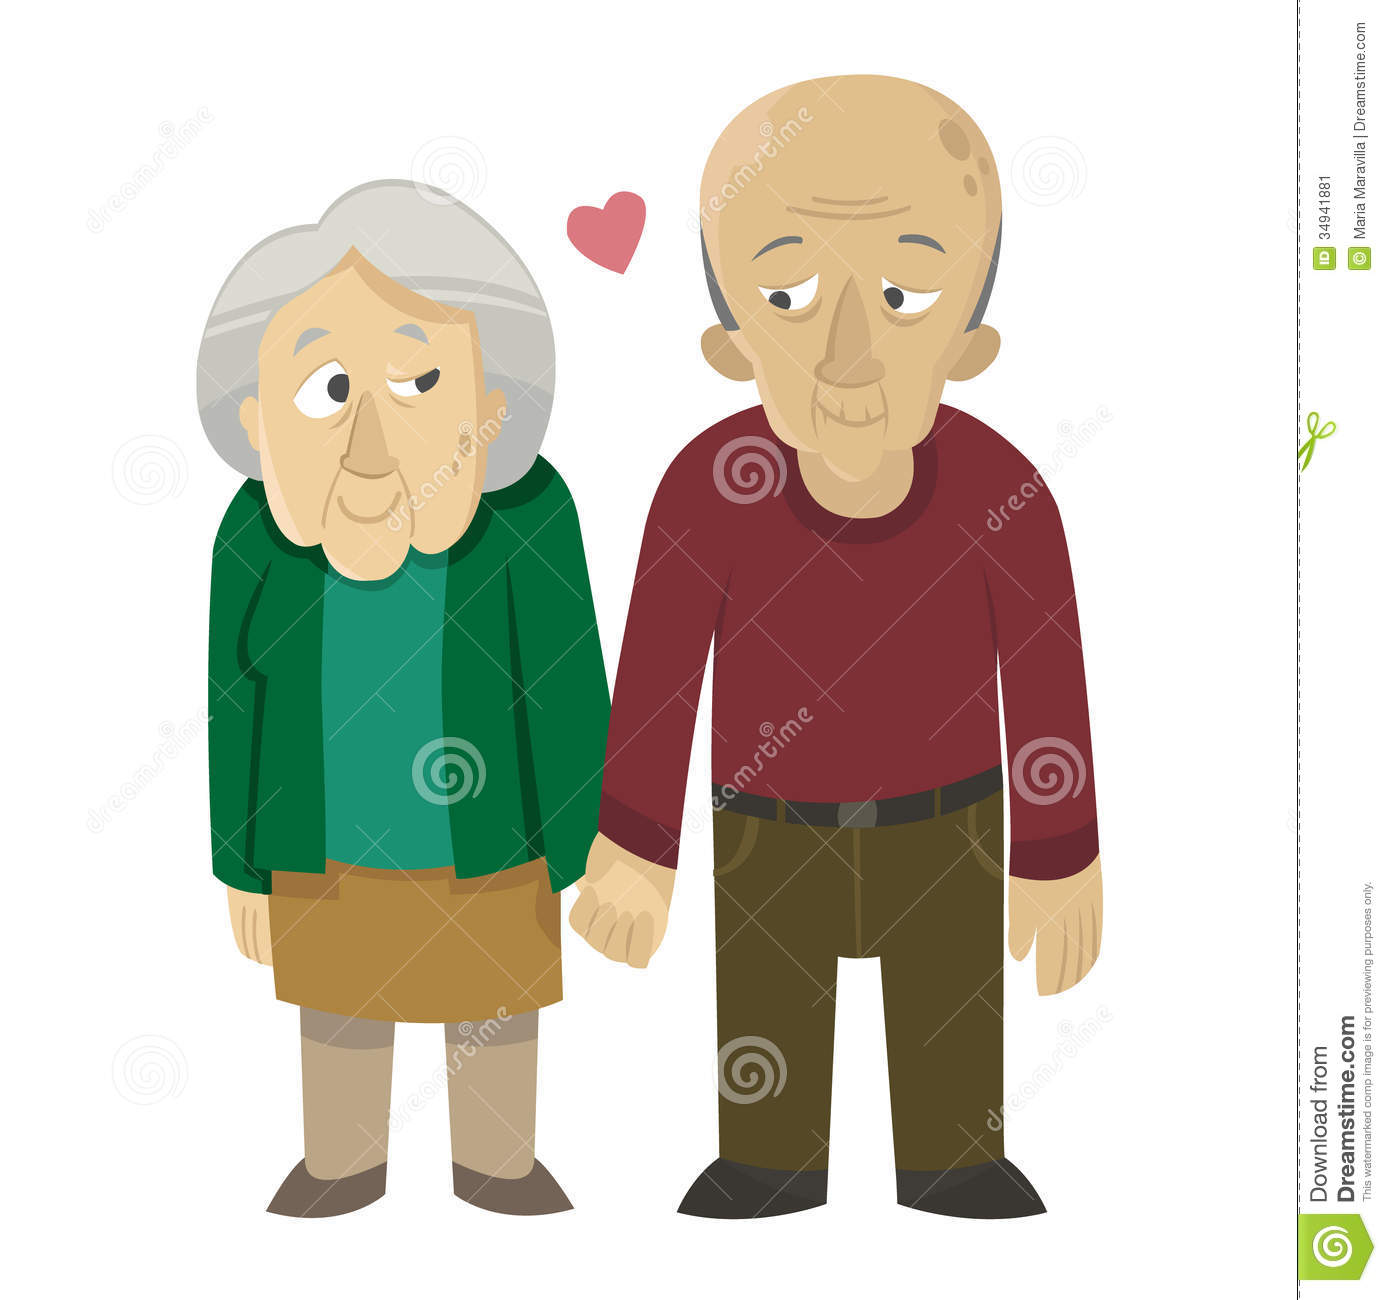 Old Man Of Color And Old White Woman Holding Hands With A Pink Heart